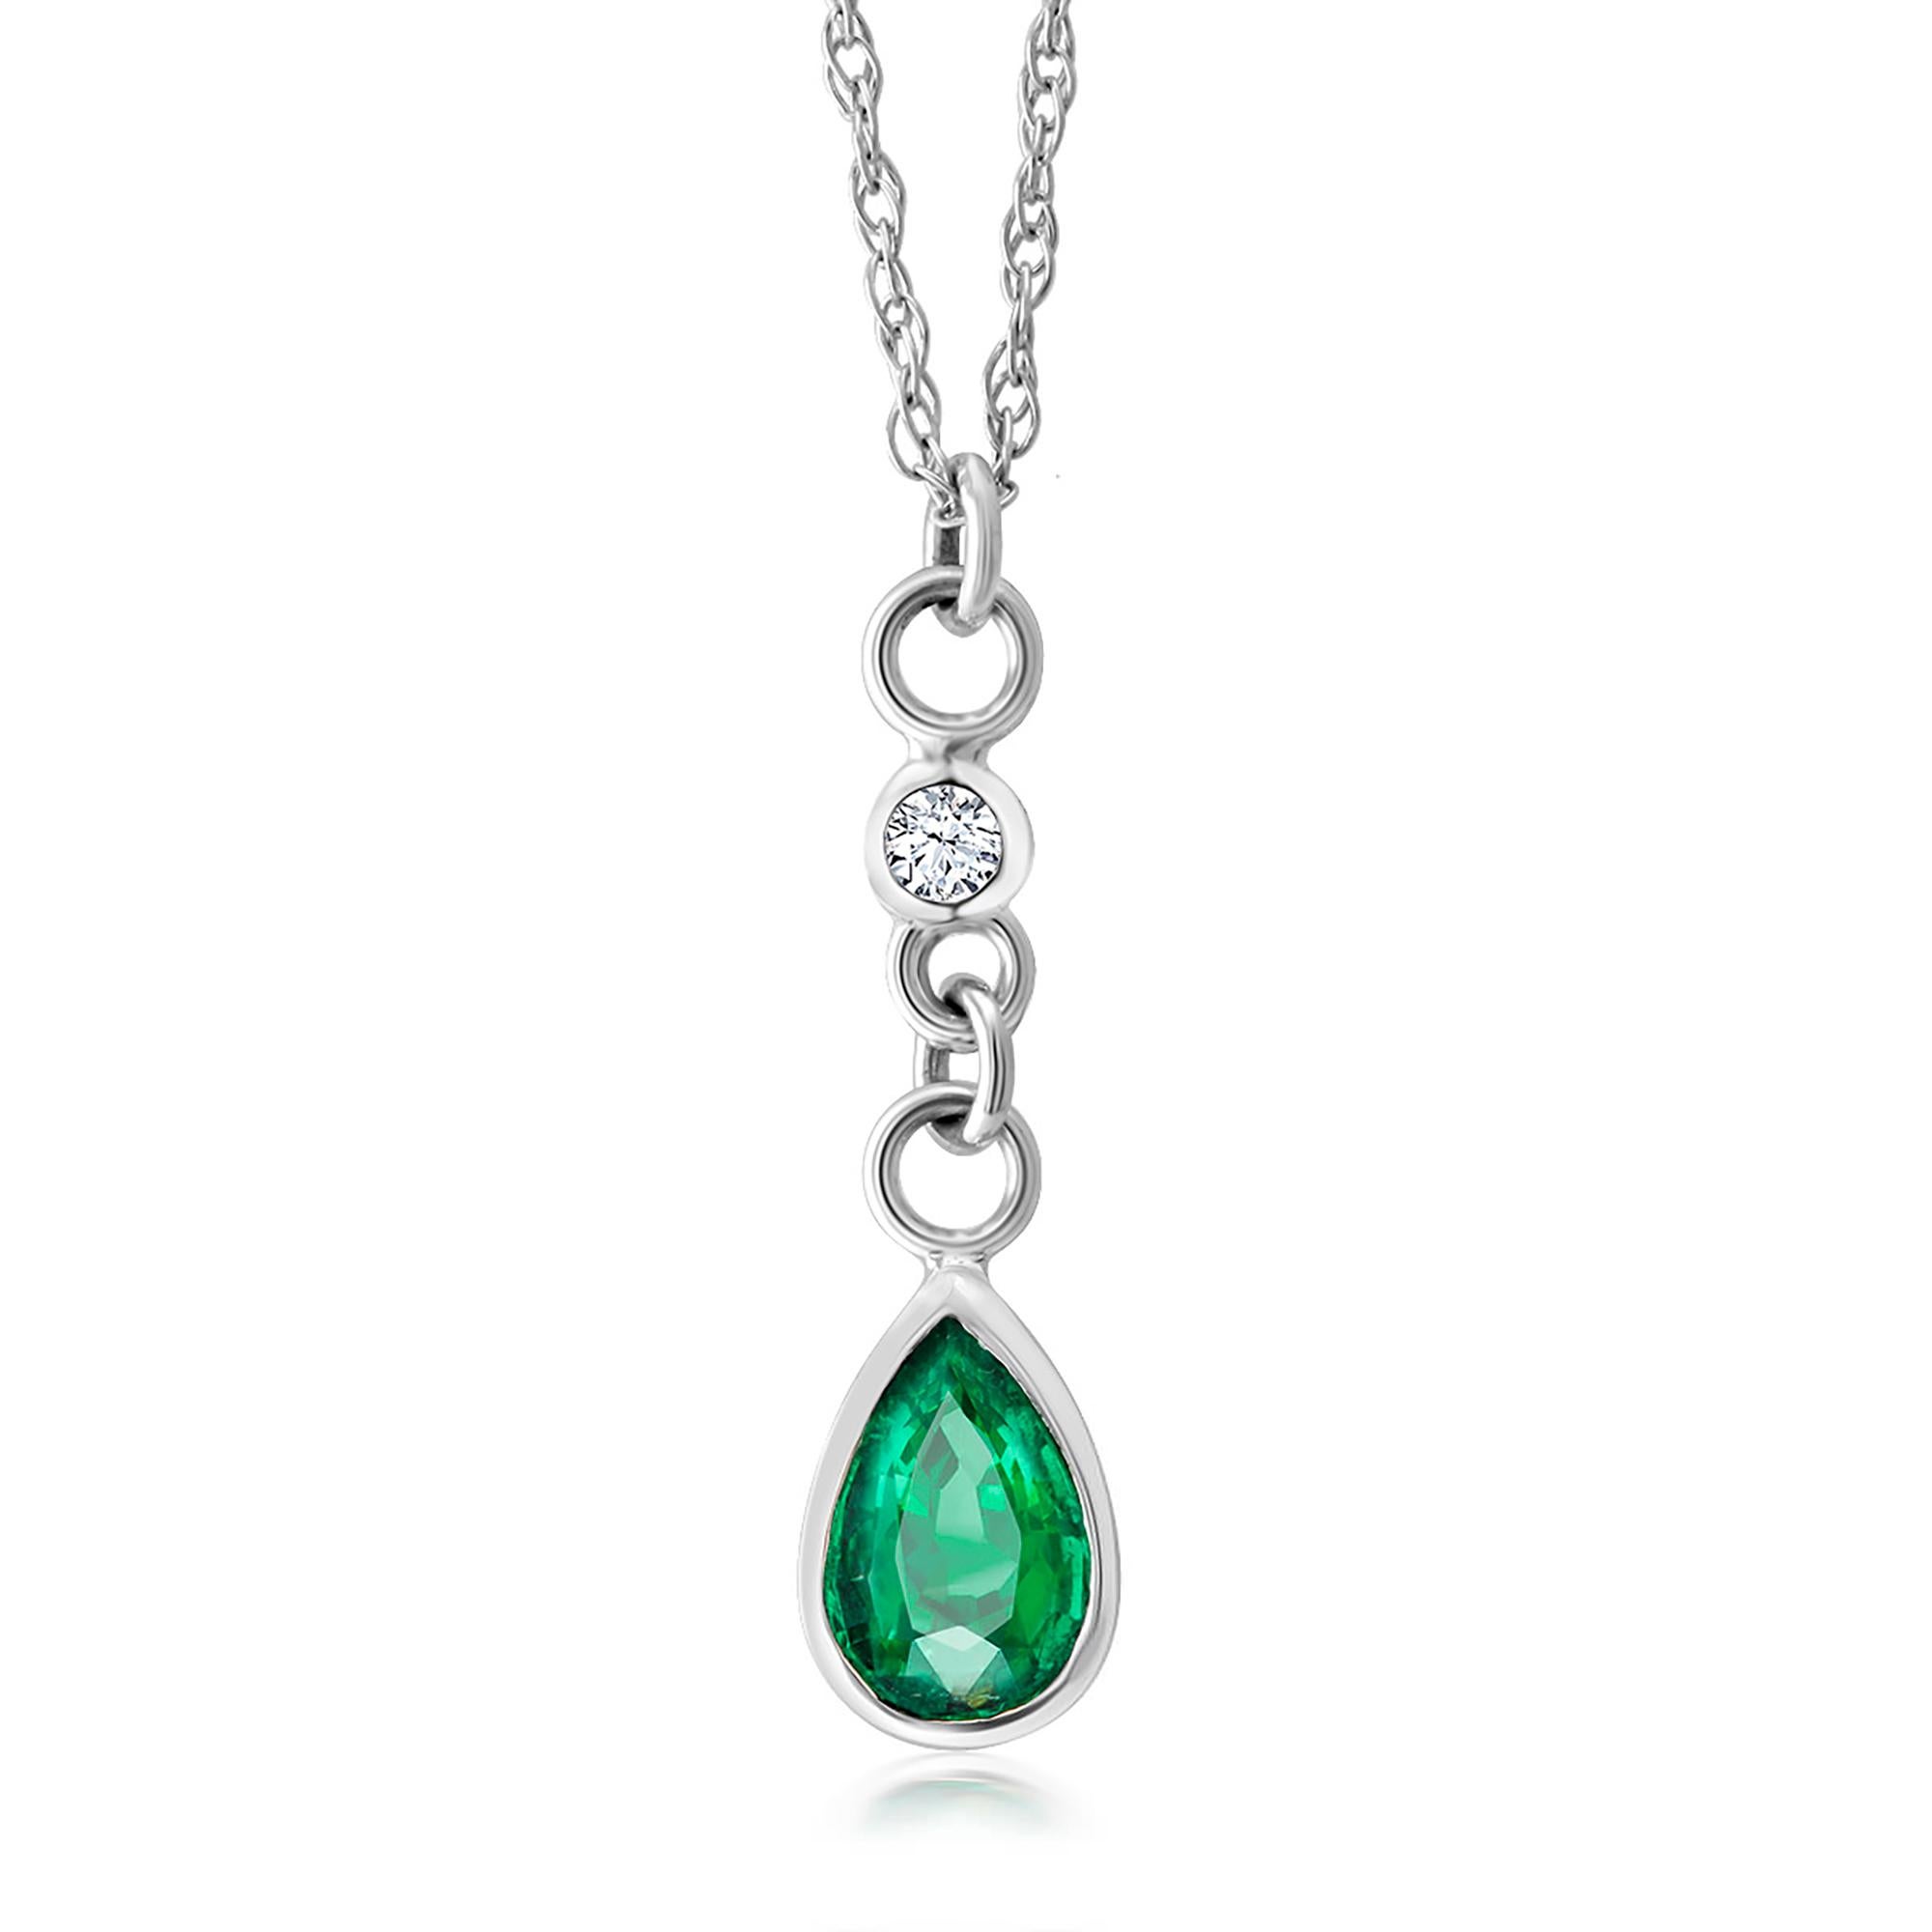 Pear Cut White Gold Pear Shape Emerald and Diamond Pendant Necklace Weighing 0.84 Carat